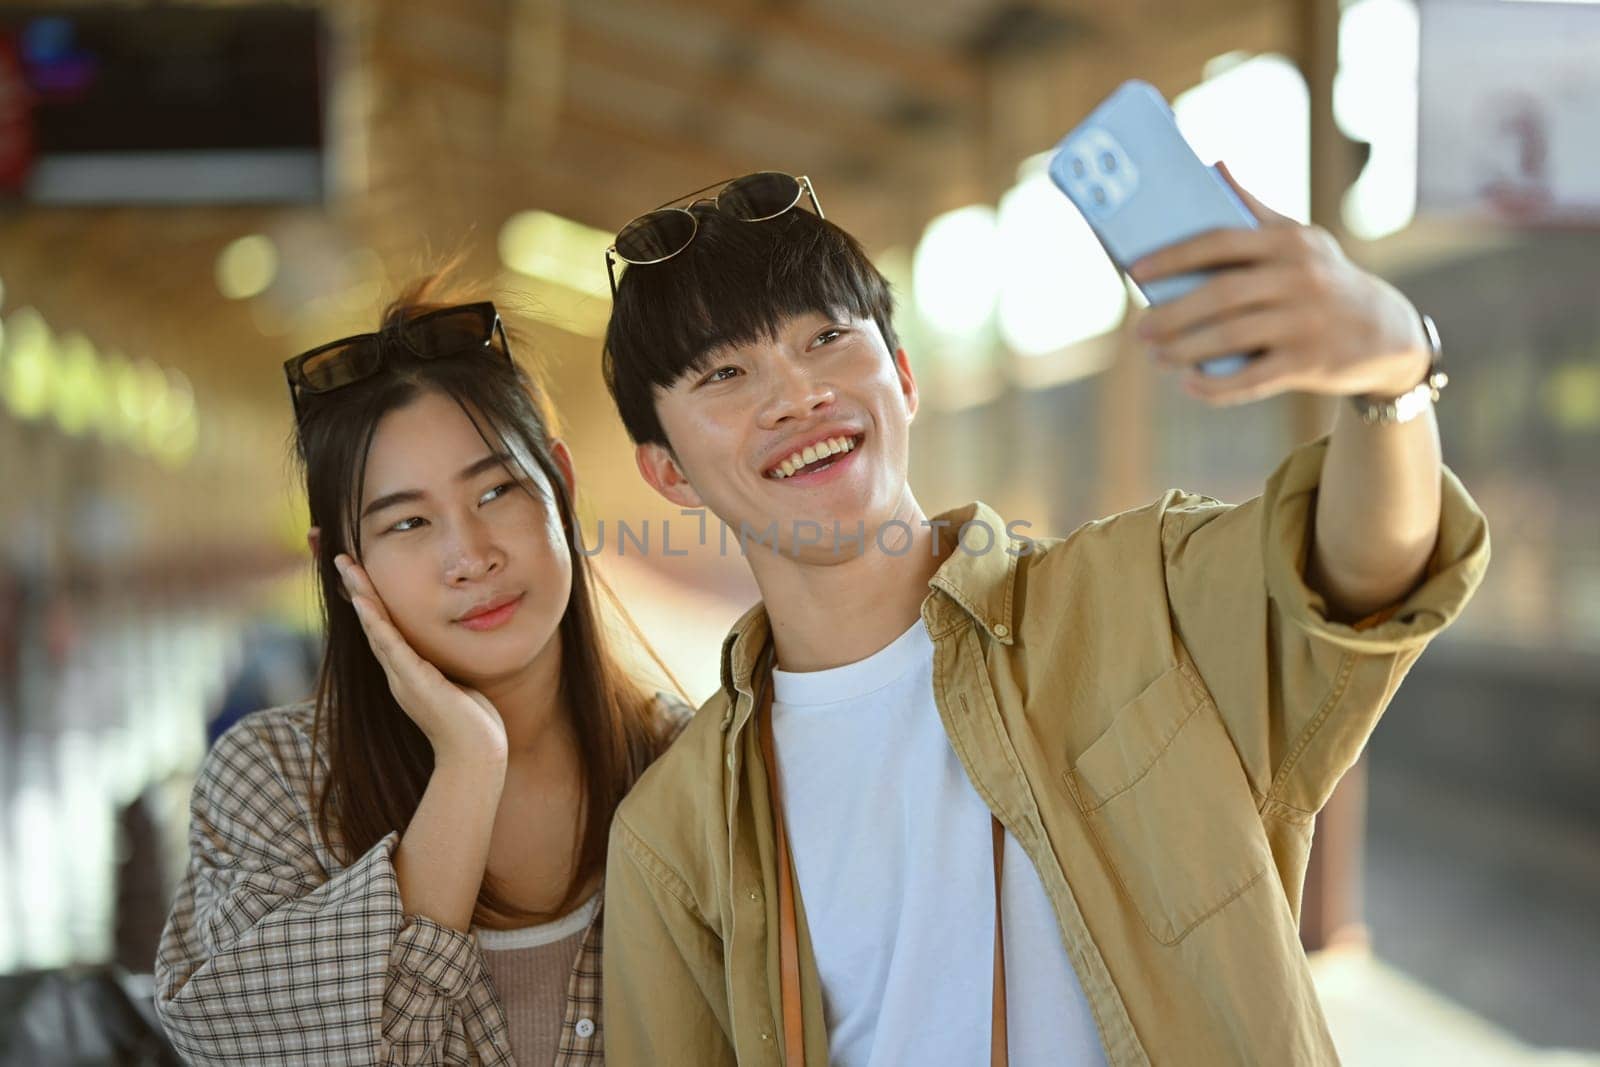 Happy and excited young couple tourists taking a selfie at train station. Travel and lifestyle concept.